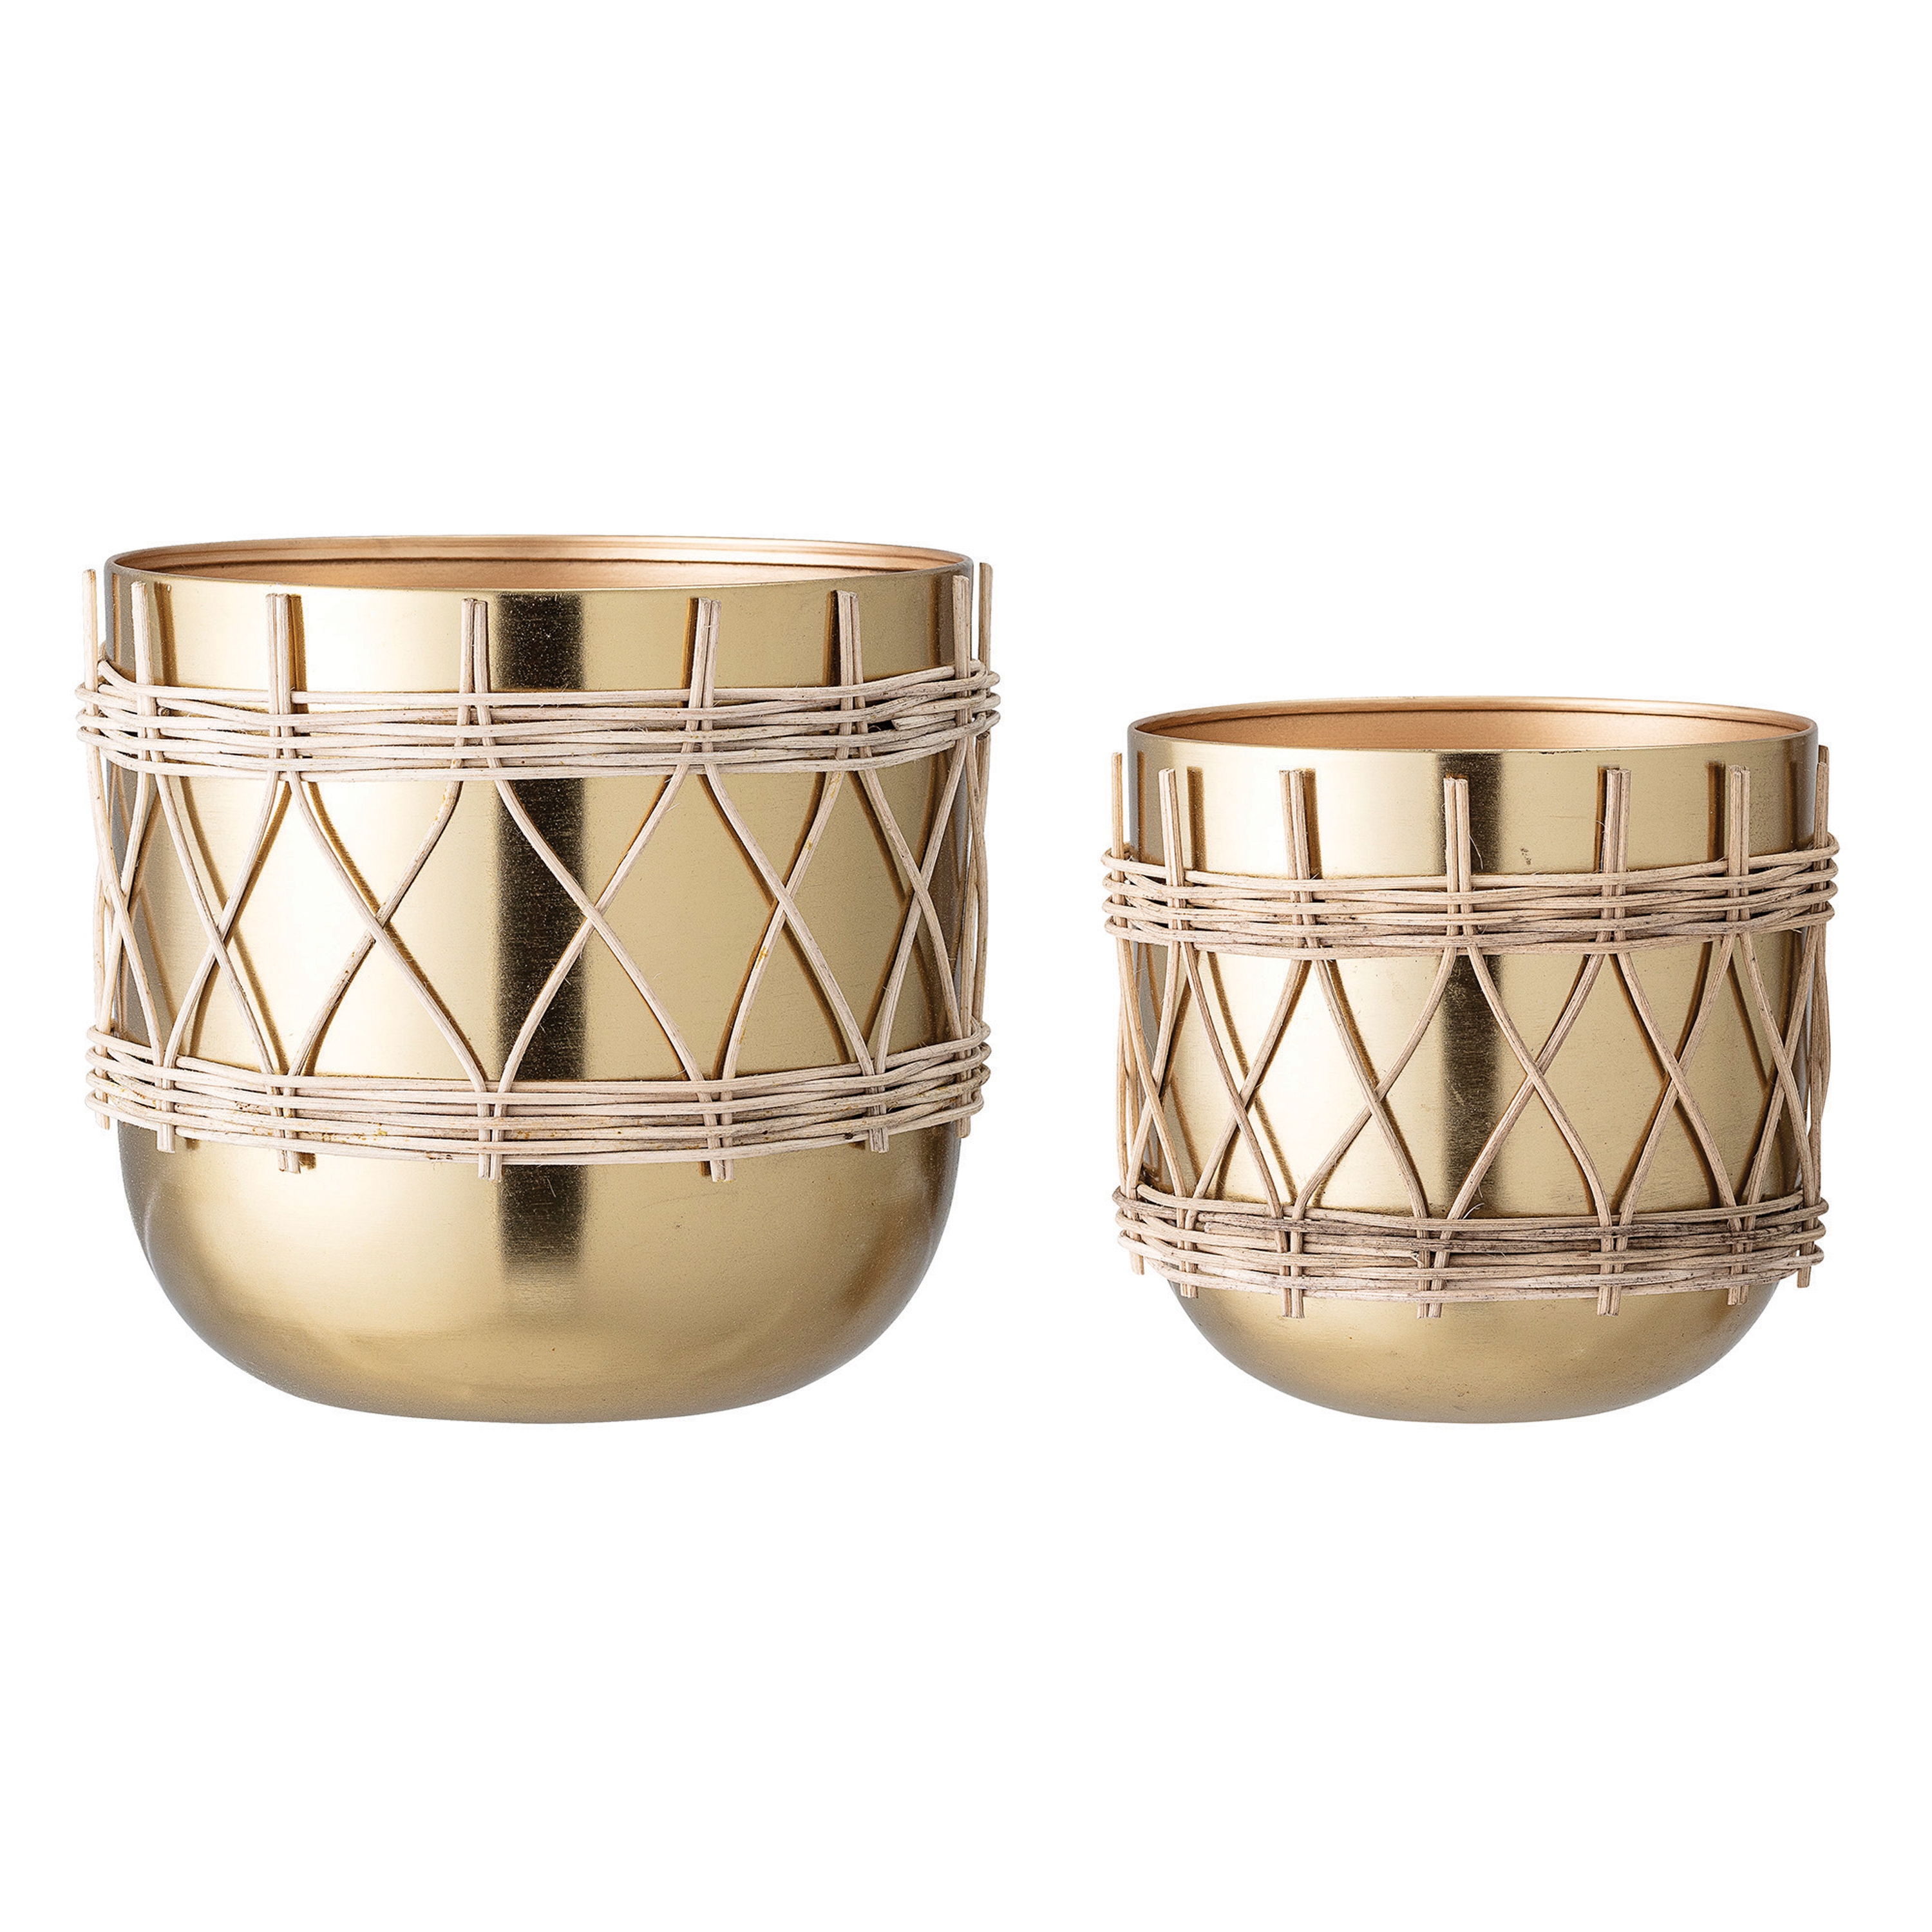 7"H & 9"H Gold Electroplated Metal Planters with Woven Rattan Sleeve (Set of 2 Sizes/Hold 7" & 9" pots) - Image 0